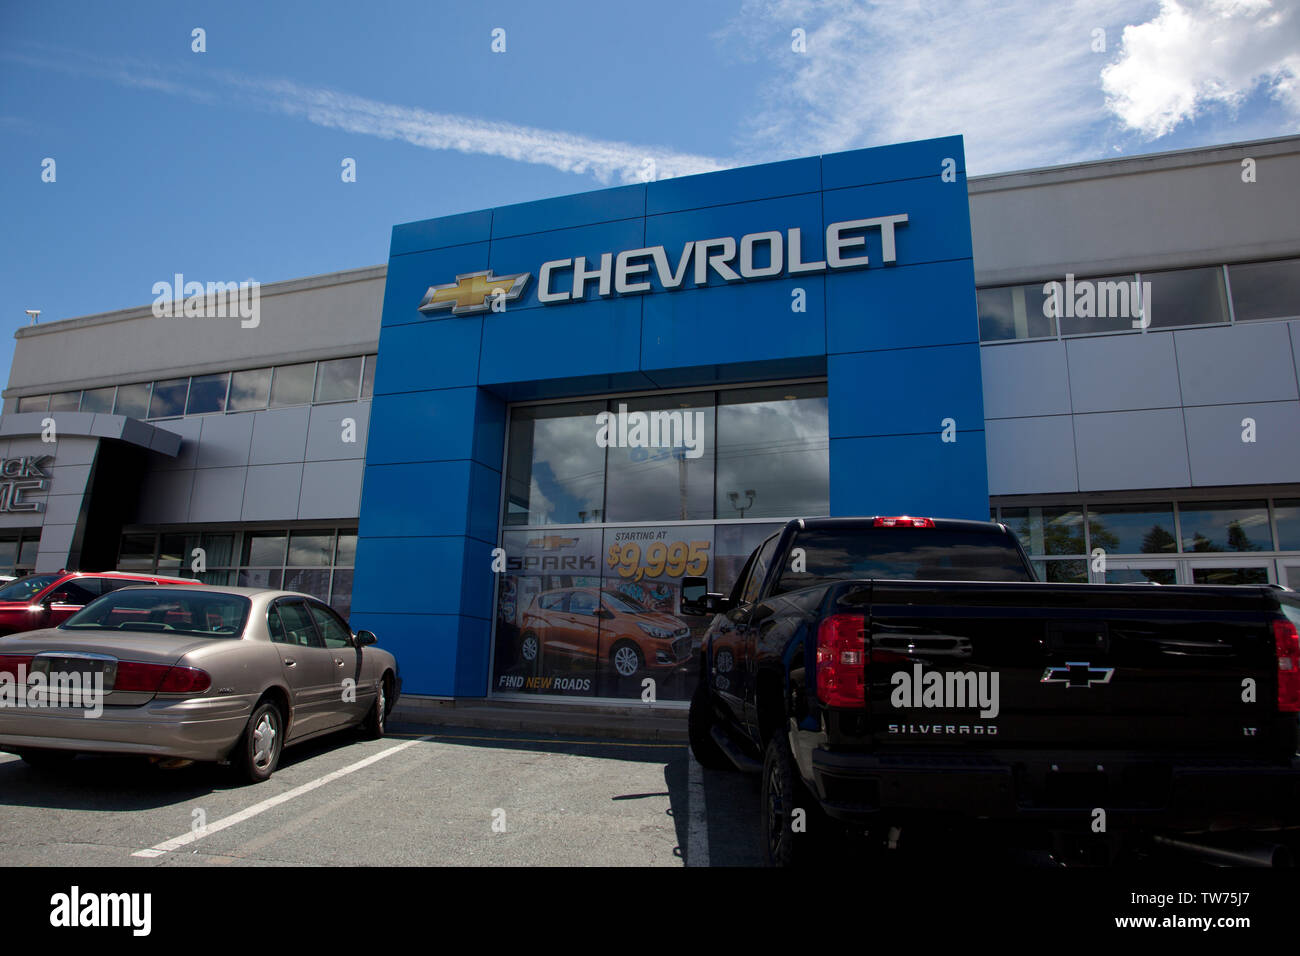 Dartmouth, Nova Scotia, Canada- June 15, 2019: Chevrolet Buick GMC business entrance by the Steele group of companies Stock Photo